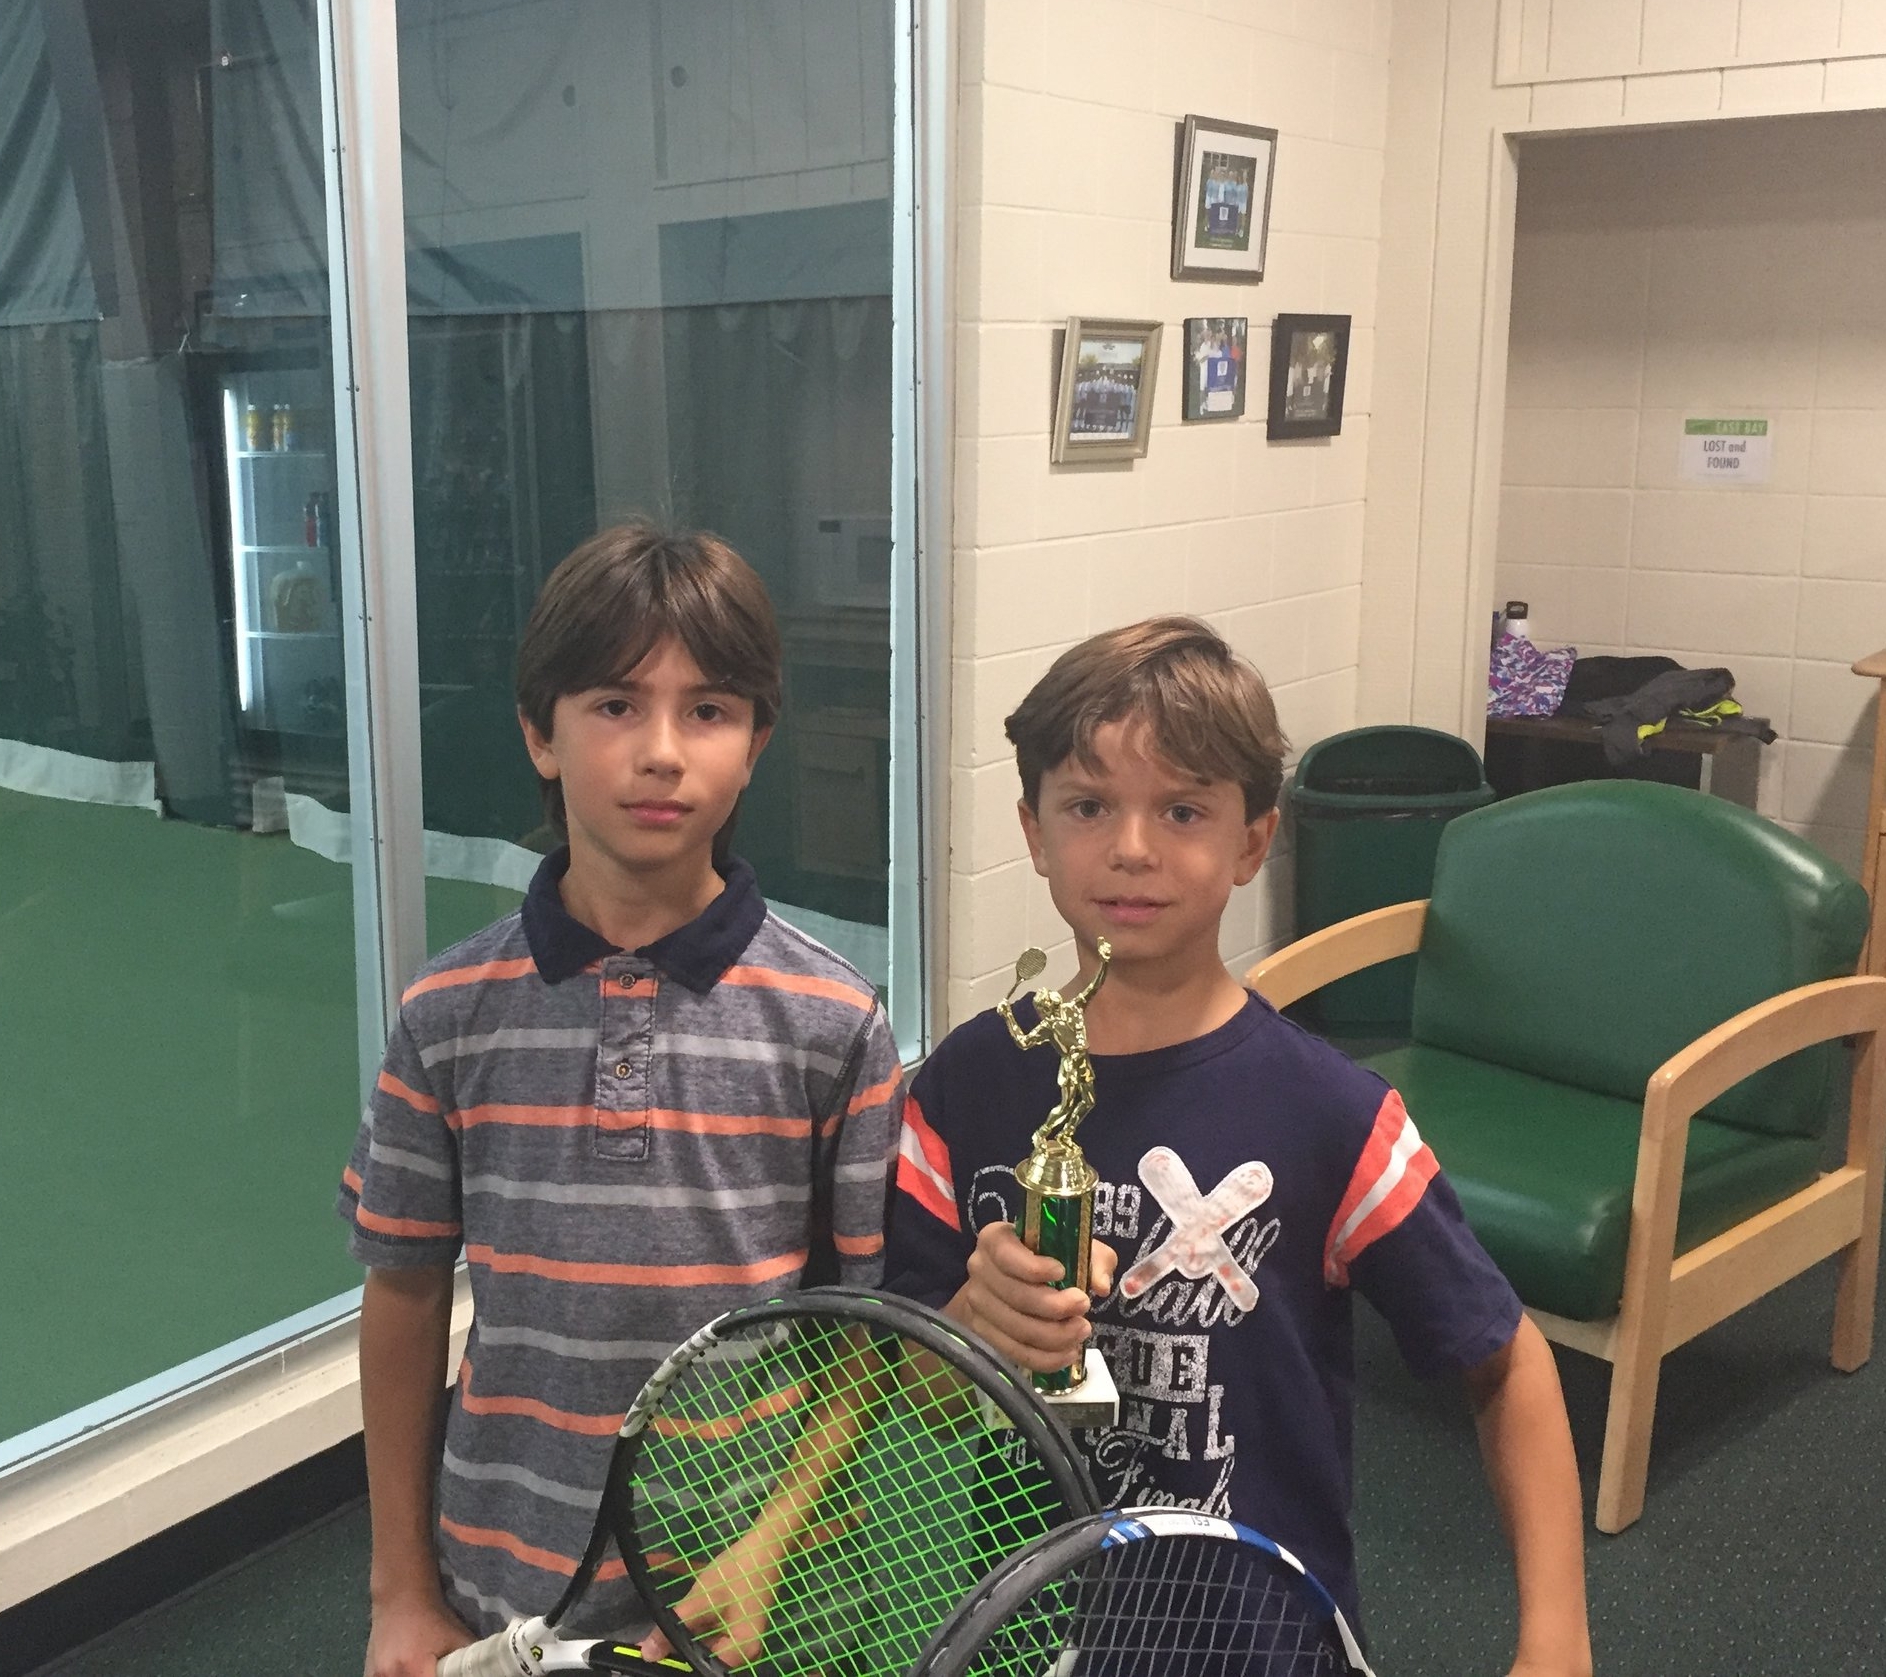 Benjamin and Thomas DeJordy - 12 and under doubles champions